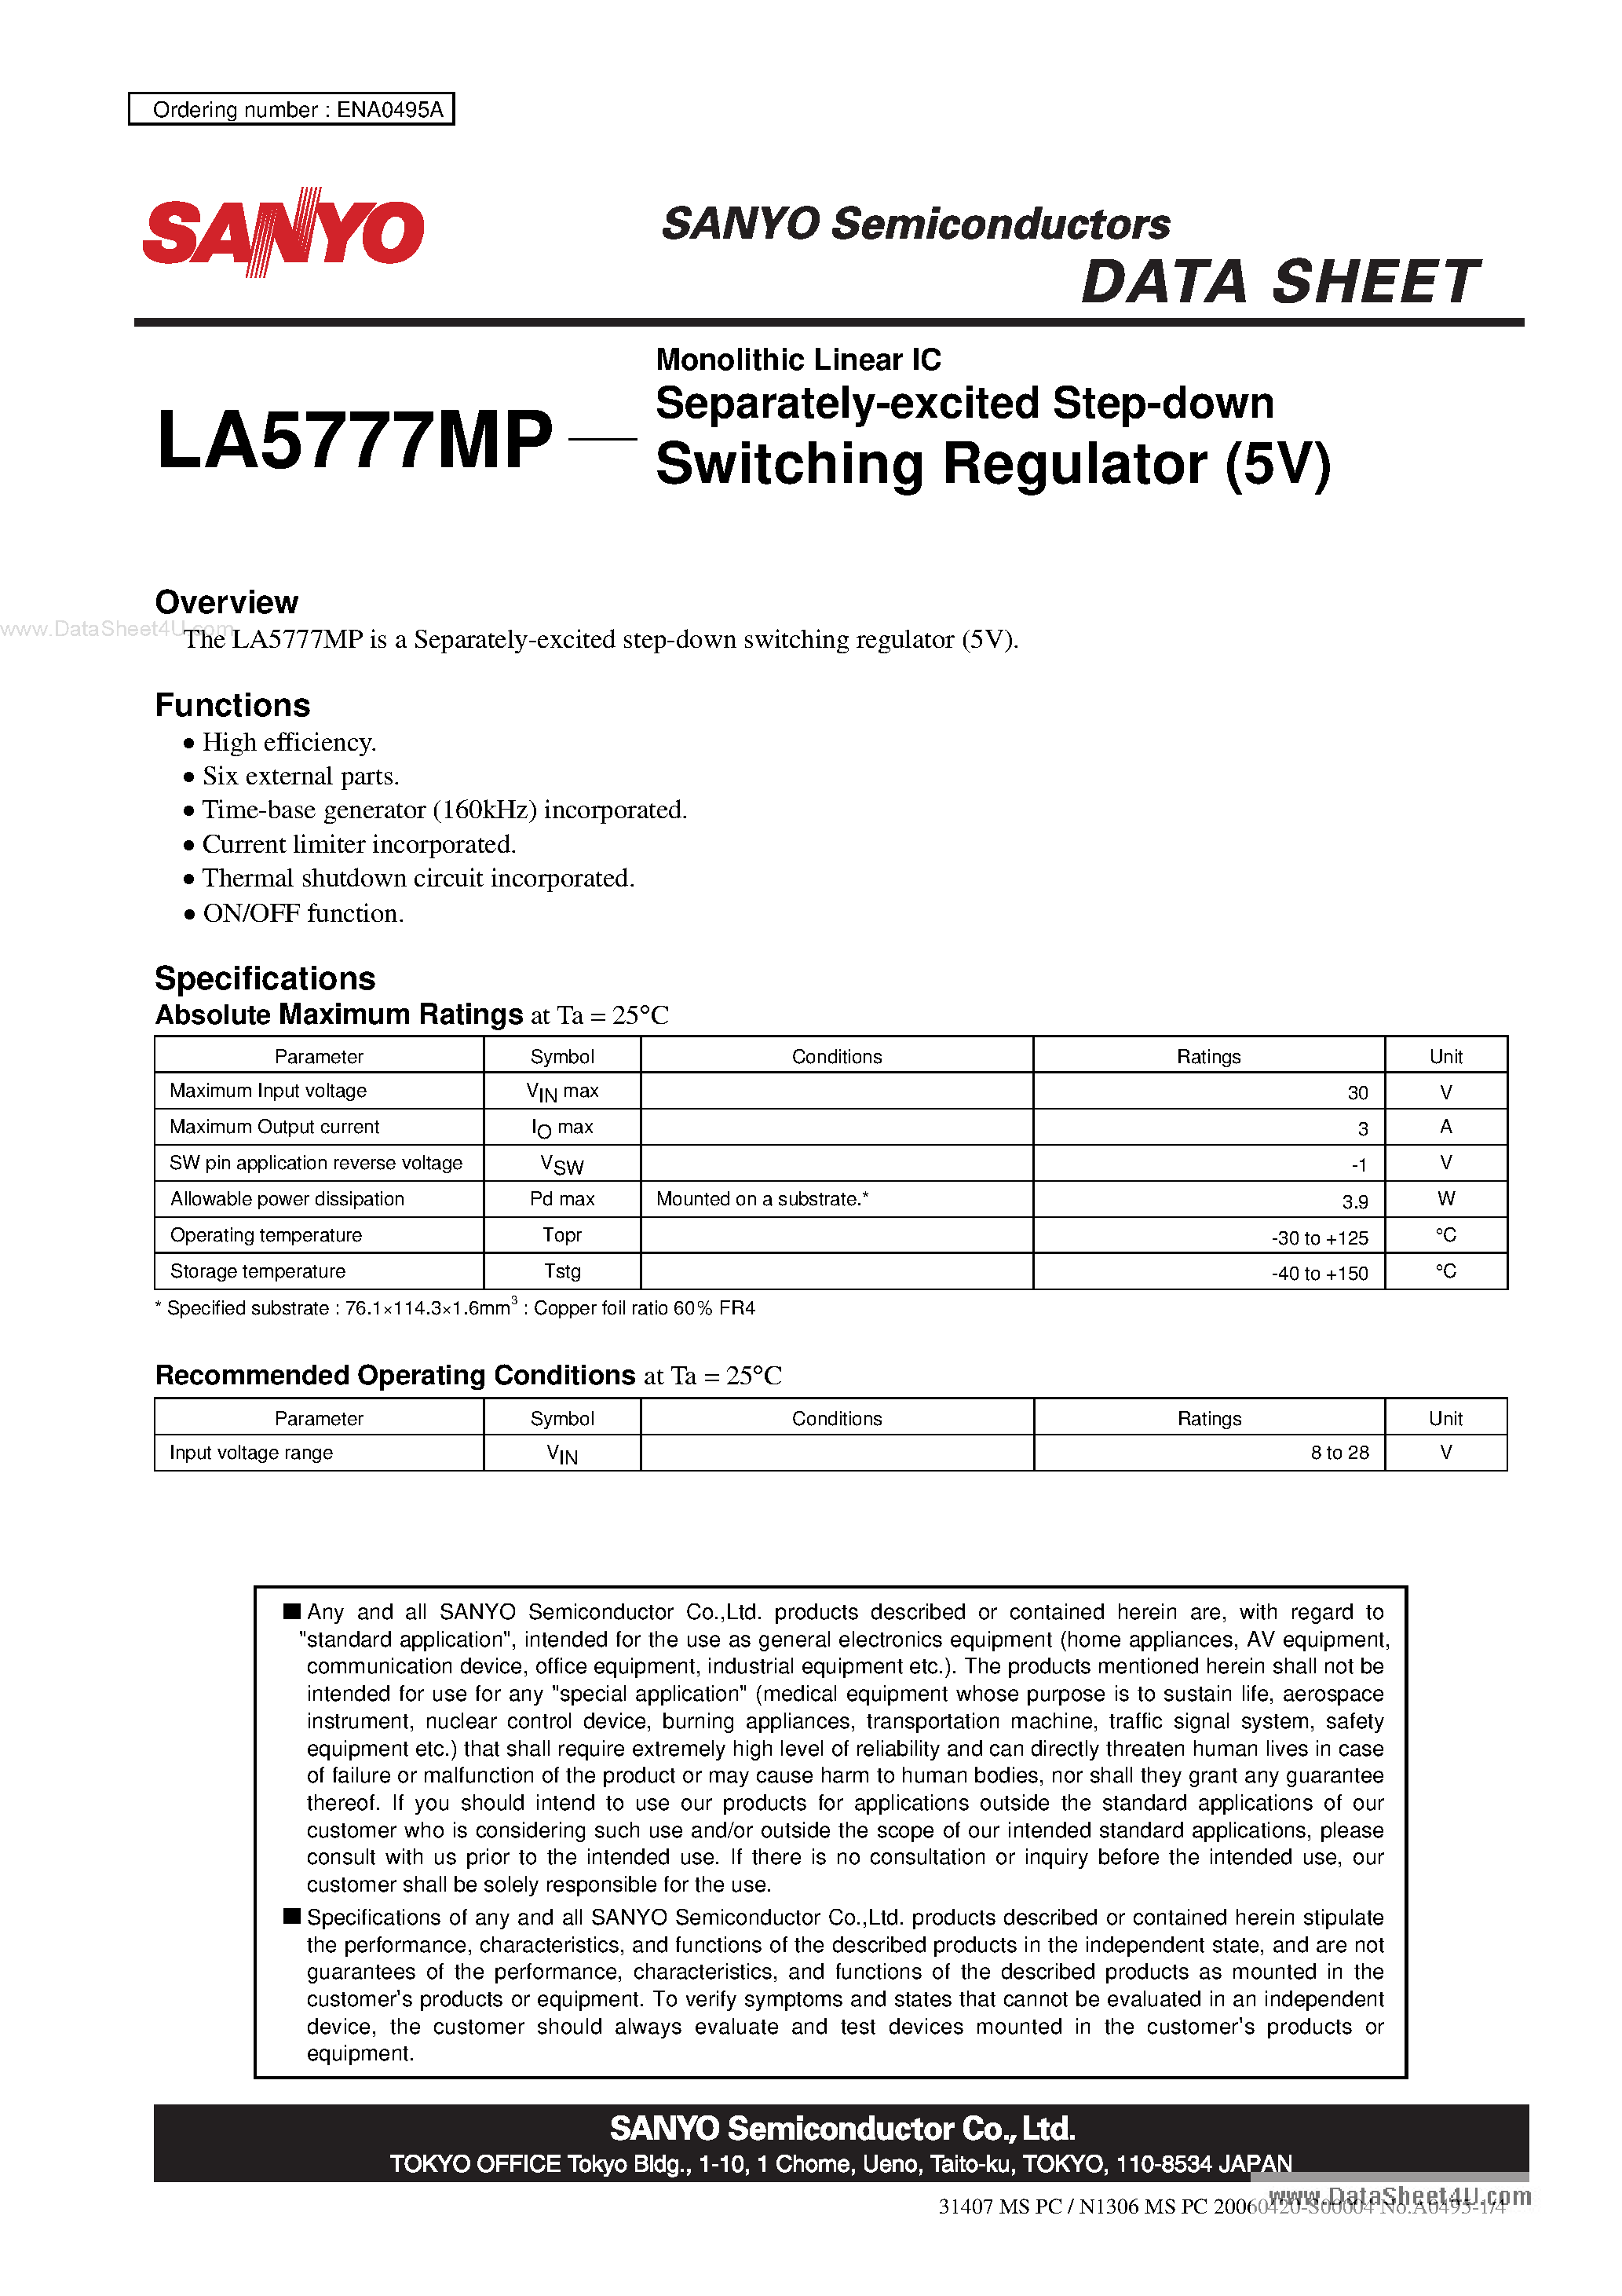 Даташит LA5777MP-Monolithic Linear IC Separately-excited Step-down Switching Regulator страница 1